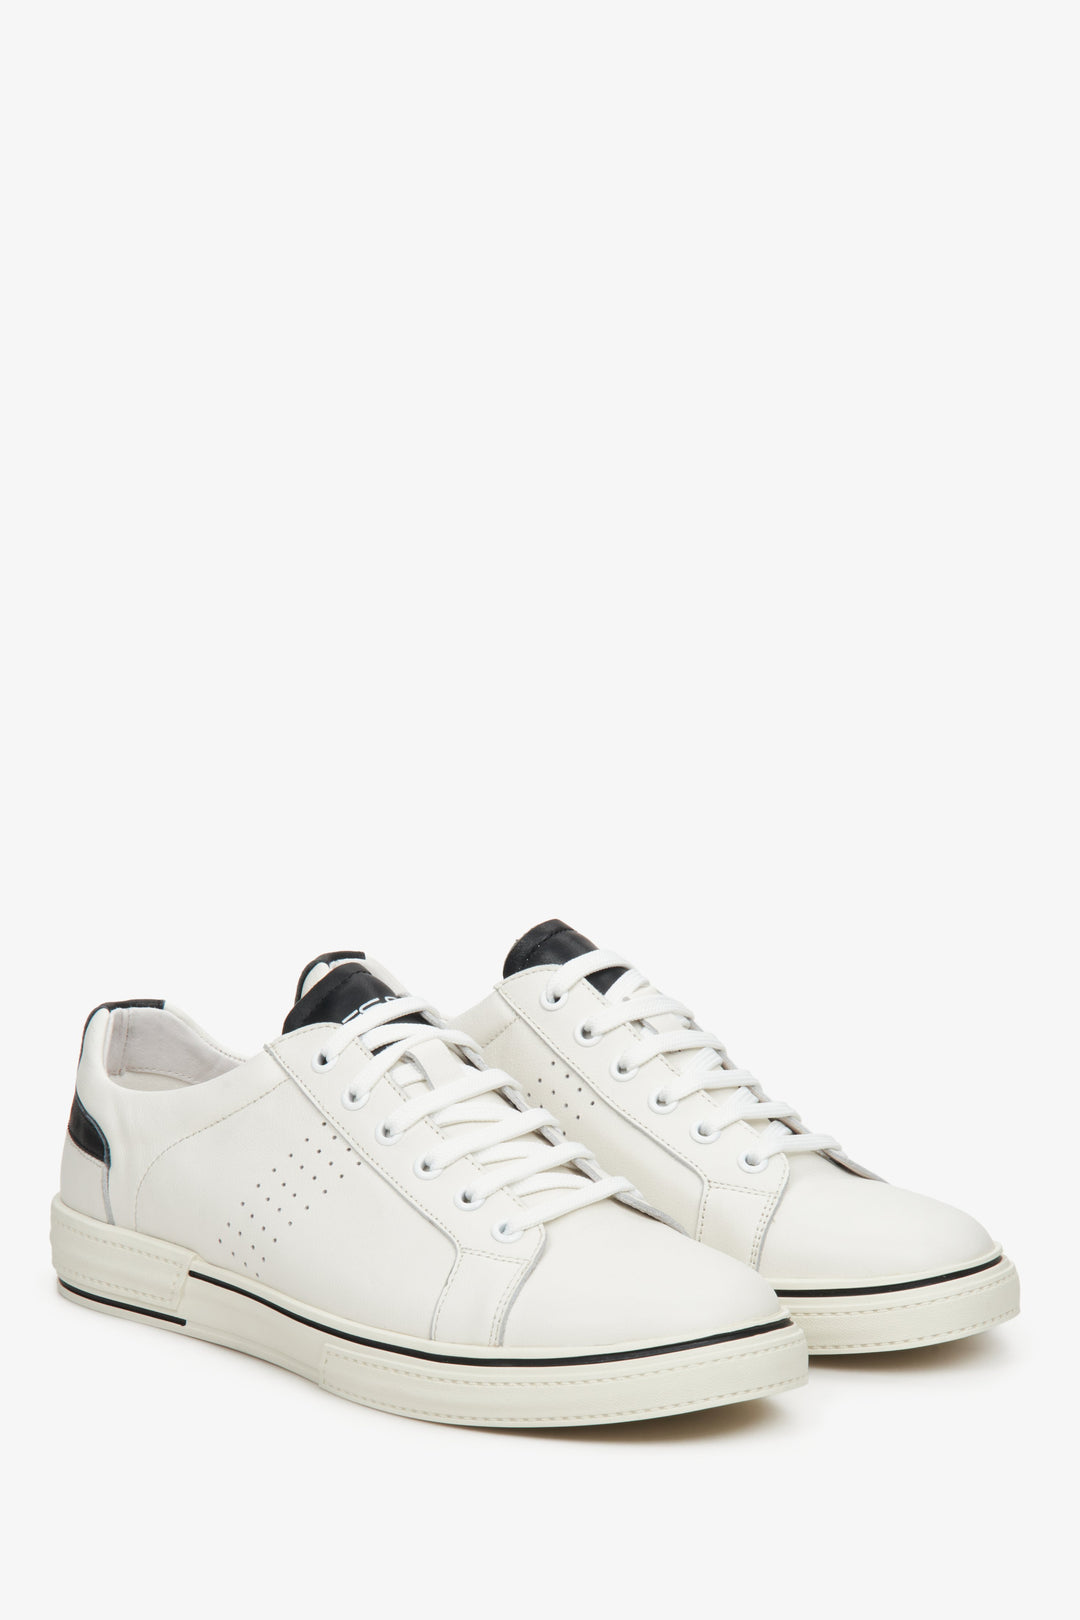 Men's black and white leather sneakers for spring and autumn - presentation of the toe and side seam of the shoes.